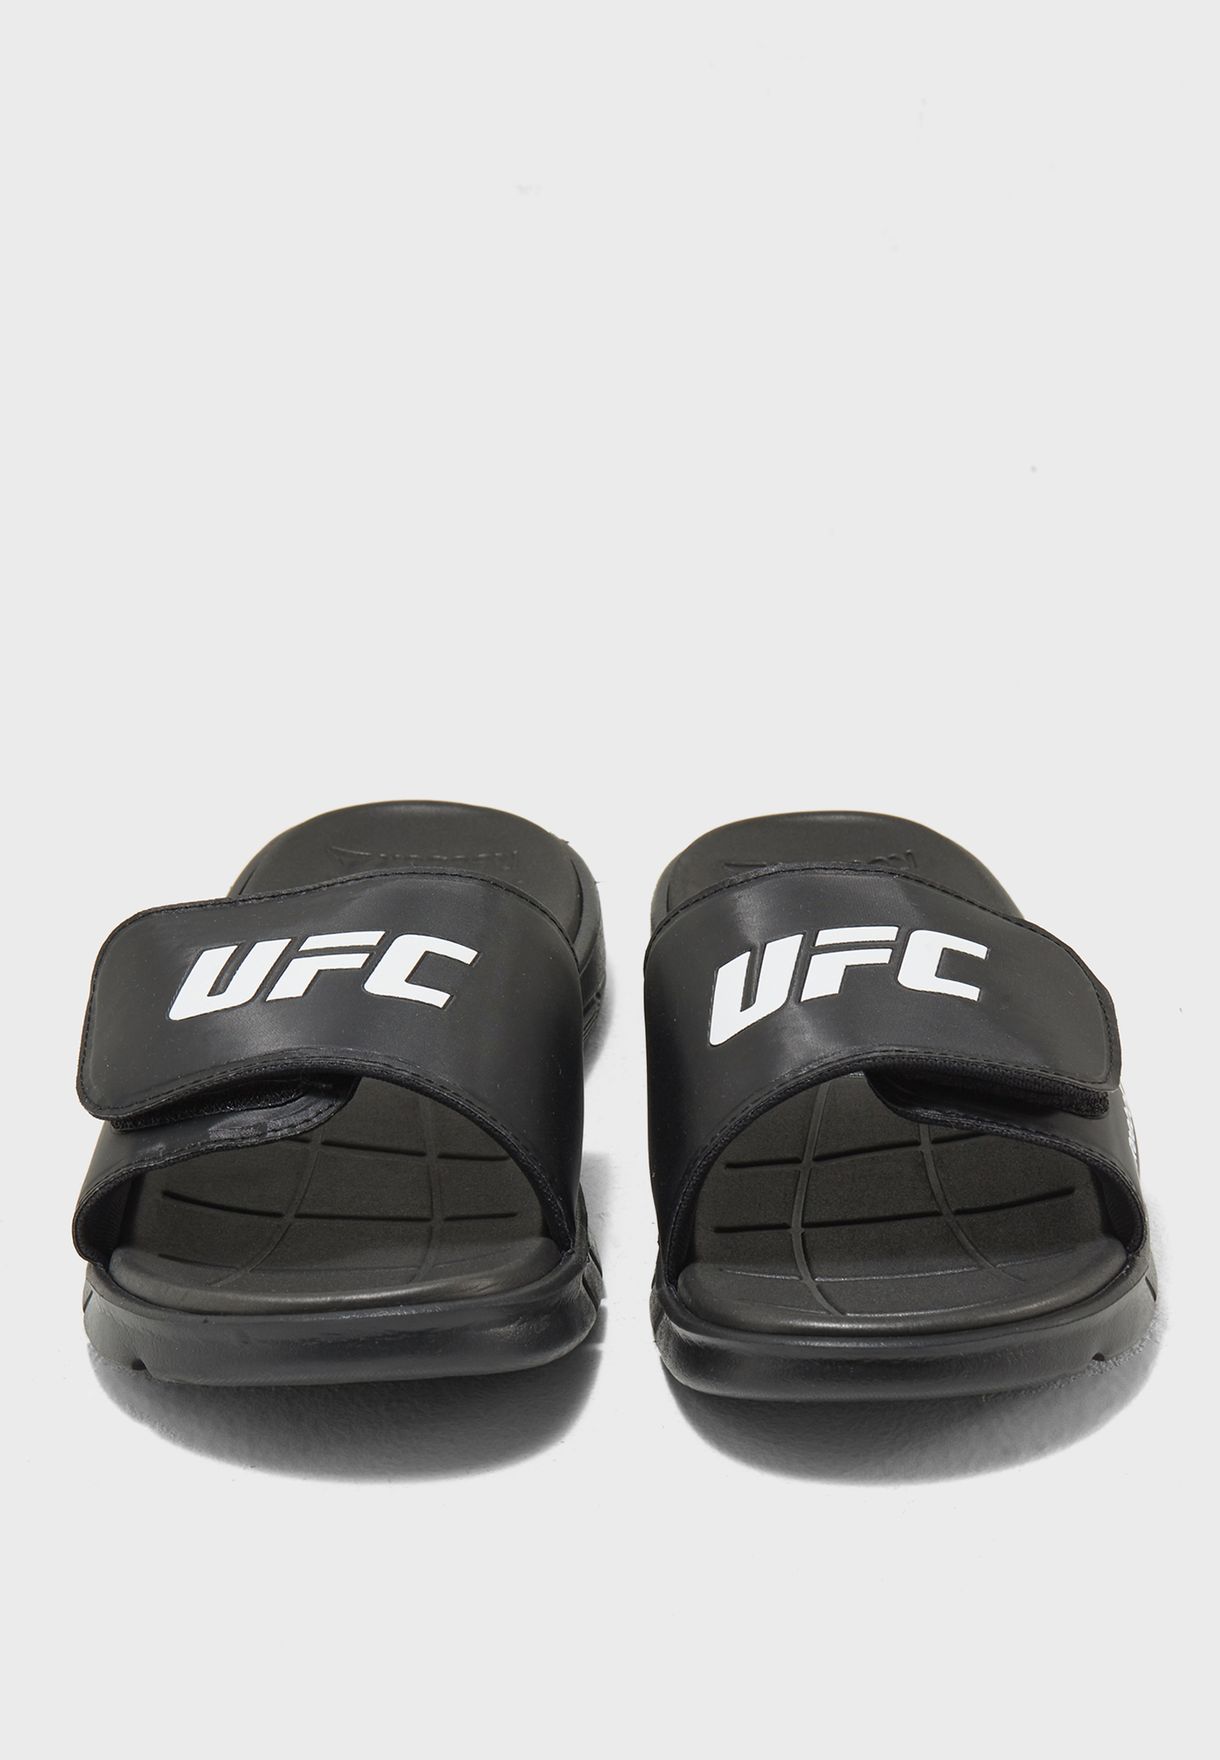 ufc slippers